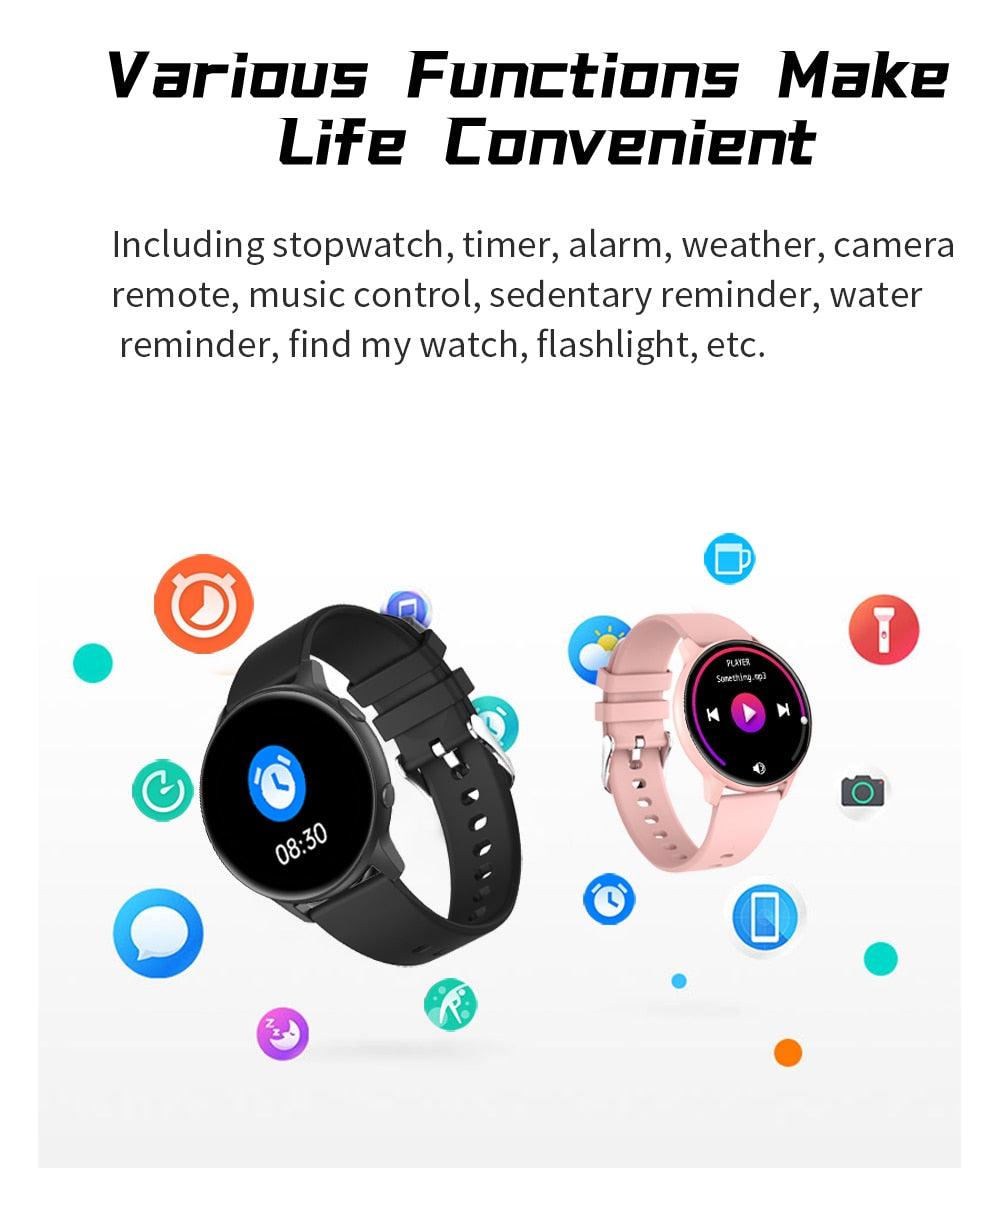 NEW MENS WATCHES - Full Touch Screen Sports Fitness Tracker IP67 Waterproof HD Bluetooth Call Smartwatch - The Jewellery Supermarket